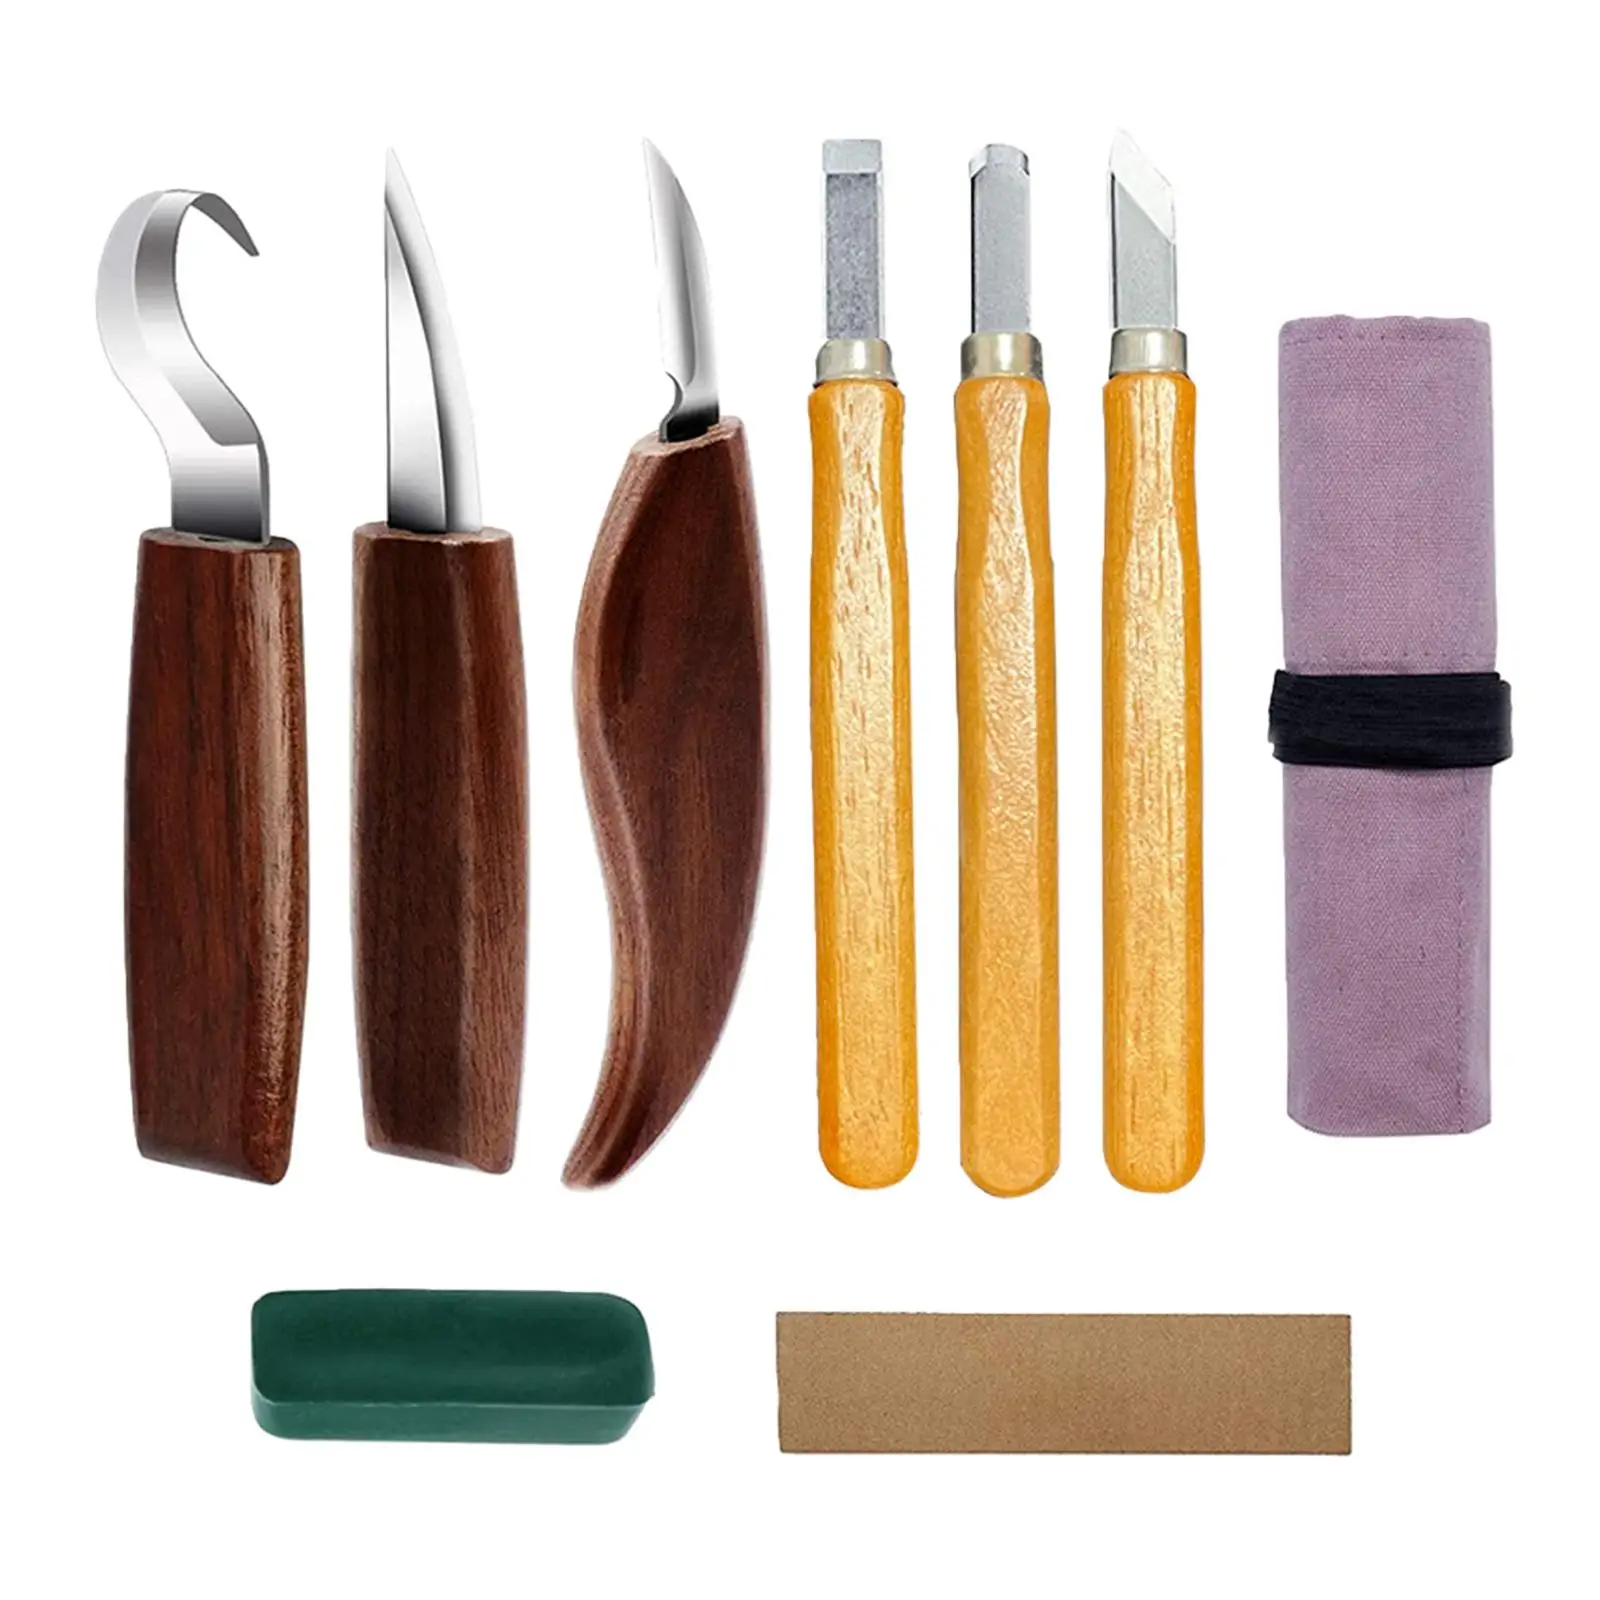  Carving Tools Set Woodworking Detail Cutter Hand Tool Beginners